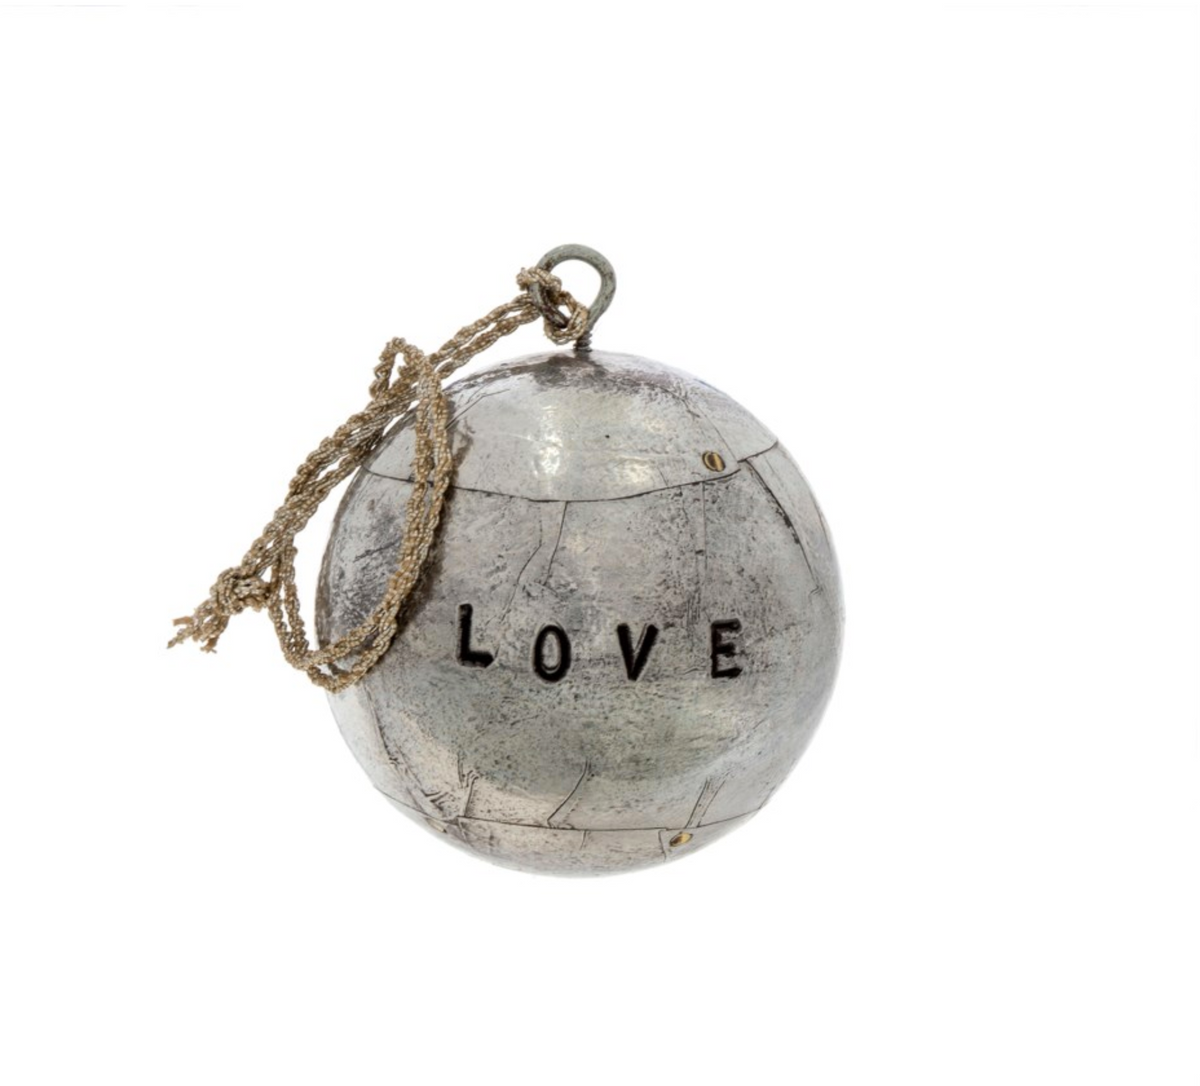 Love Ball Ornament Large, Silver